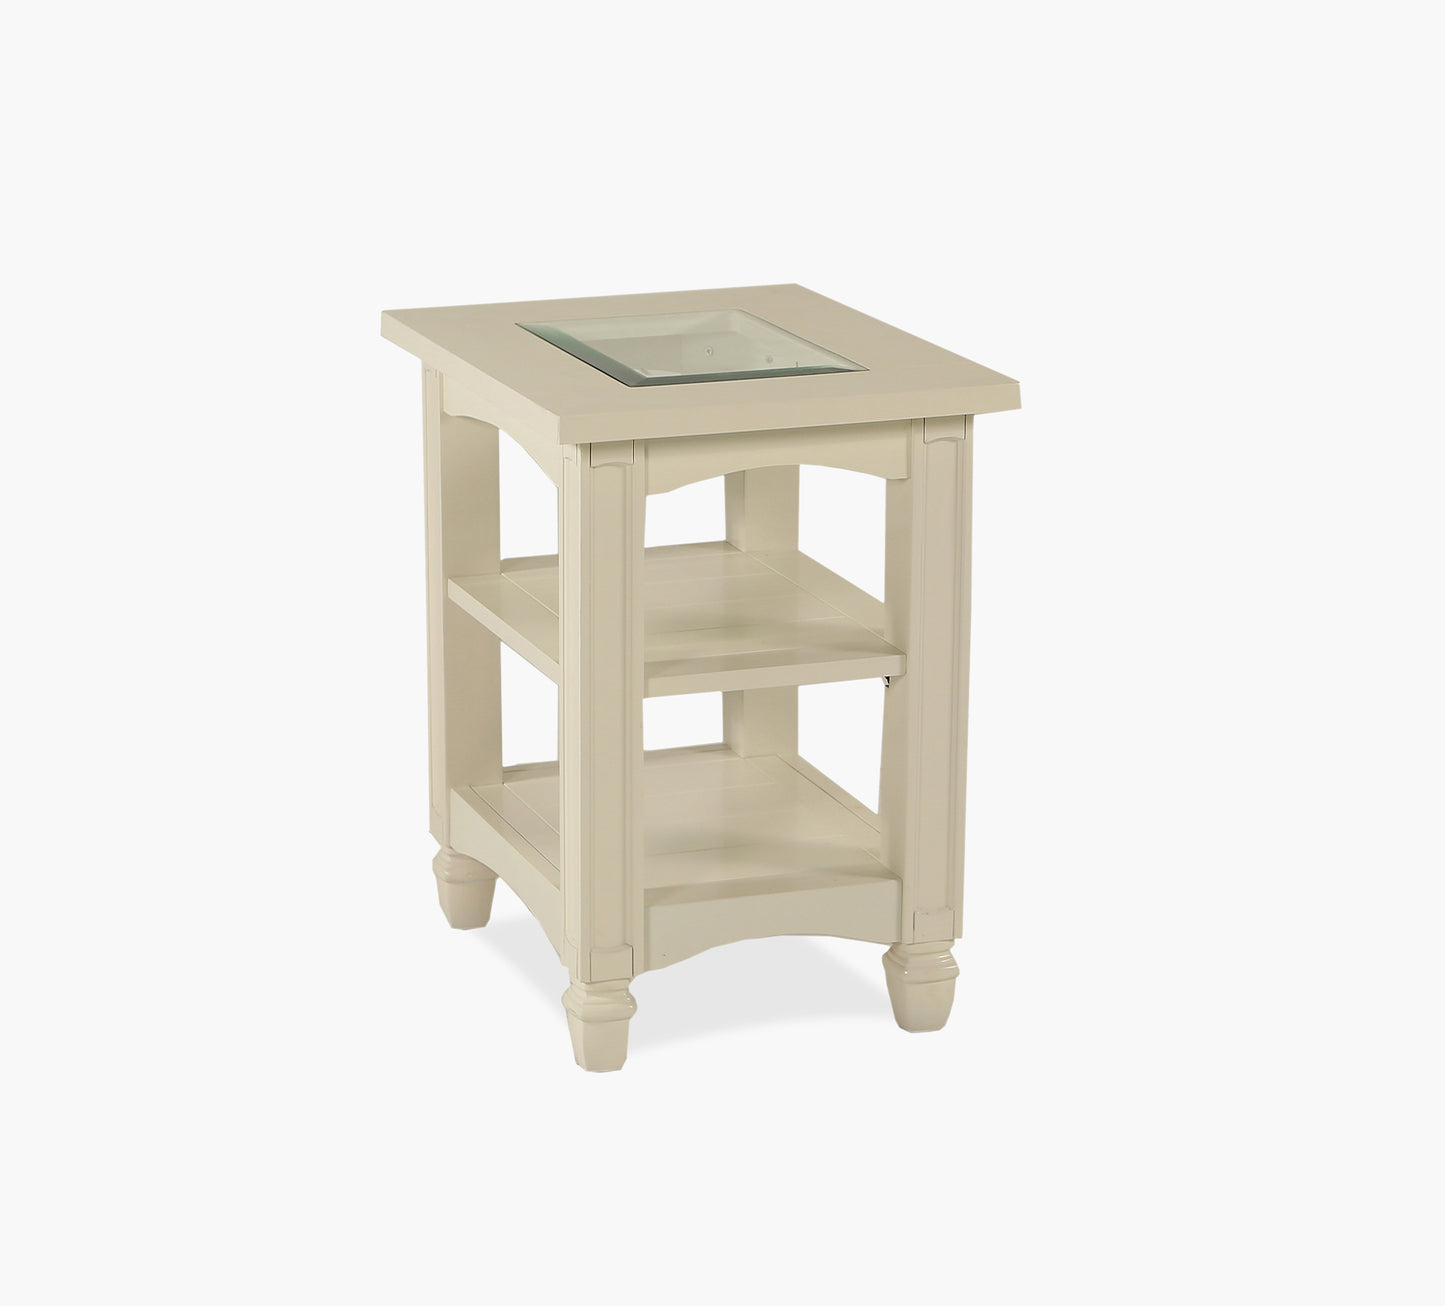 Plantation Bay Chairside Table